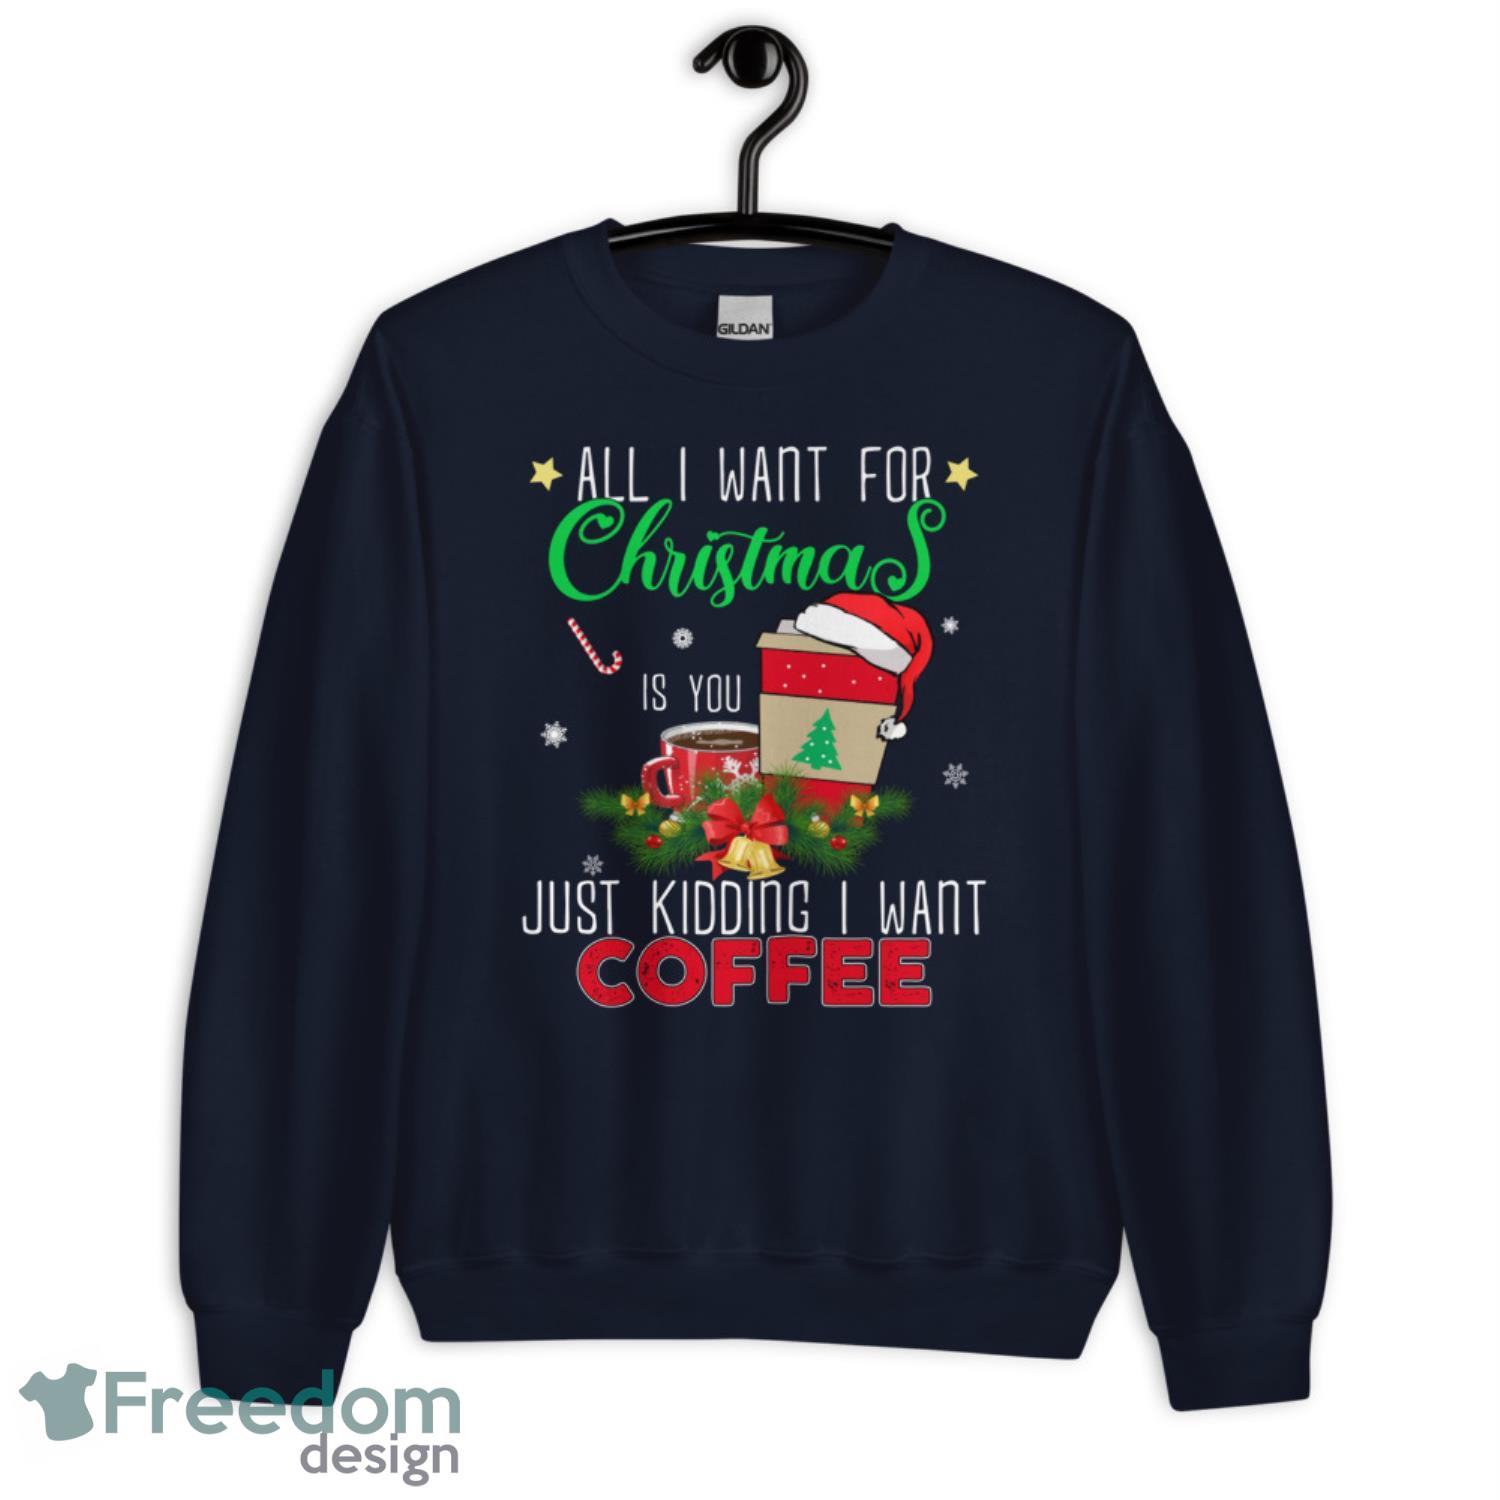 All I want For Christmas Is You Just Kidding I Want Coffee Christmas Swater - G185 Crewneck Sweatshirt-1